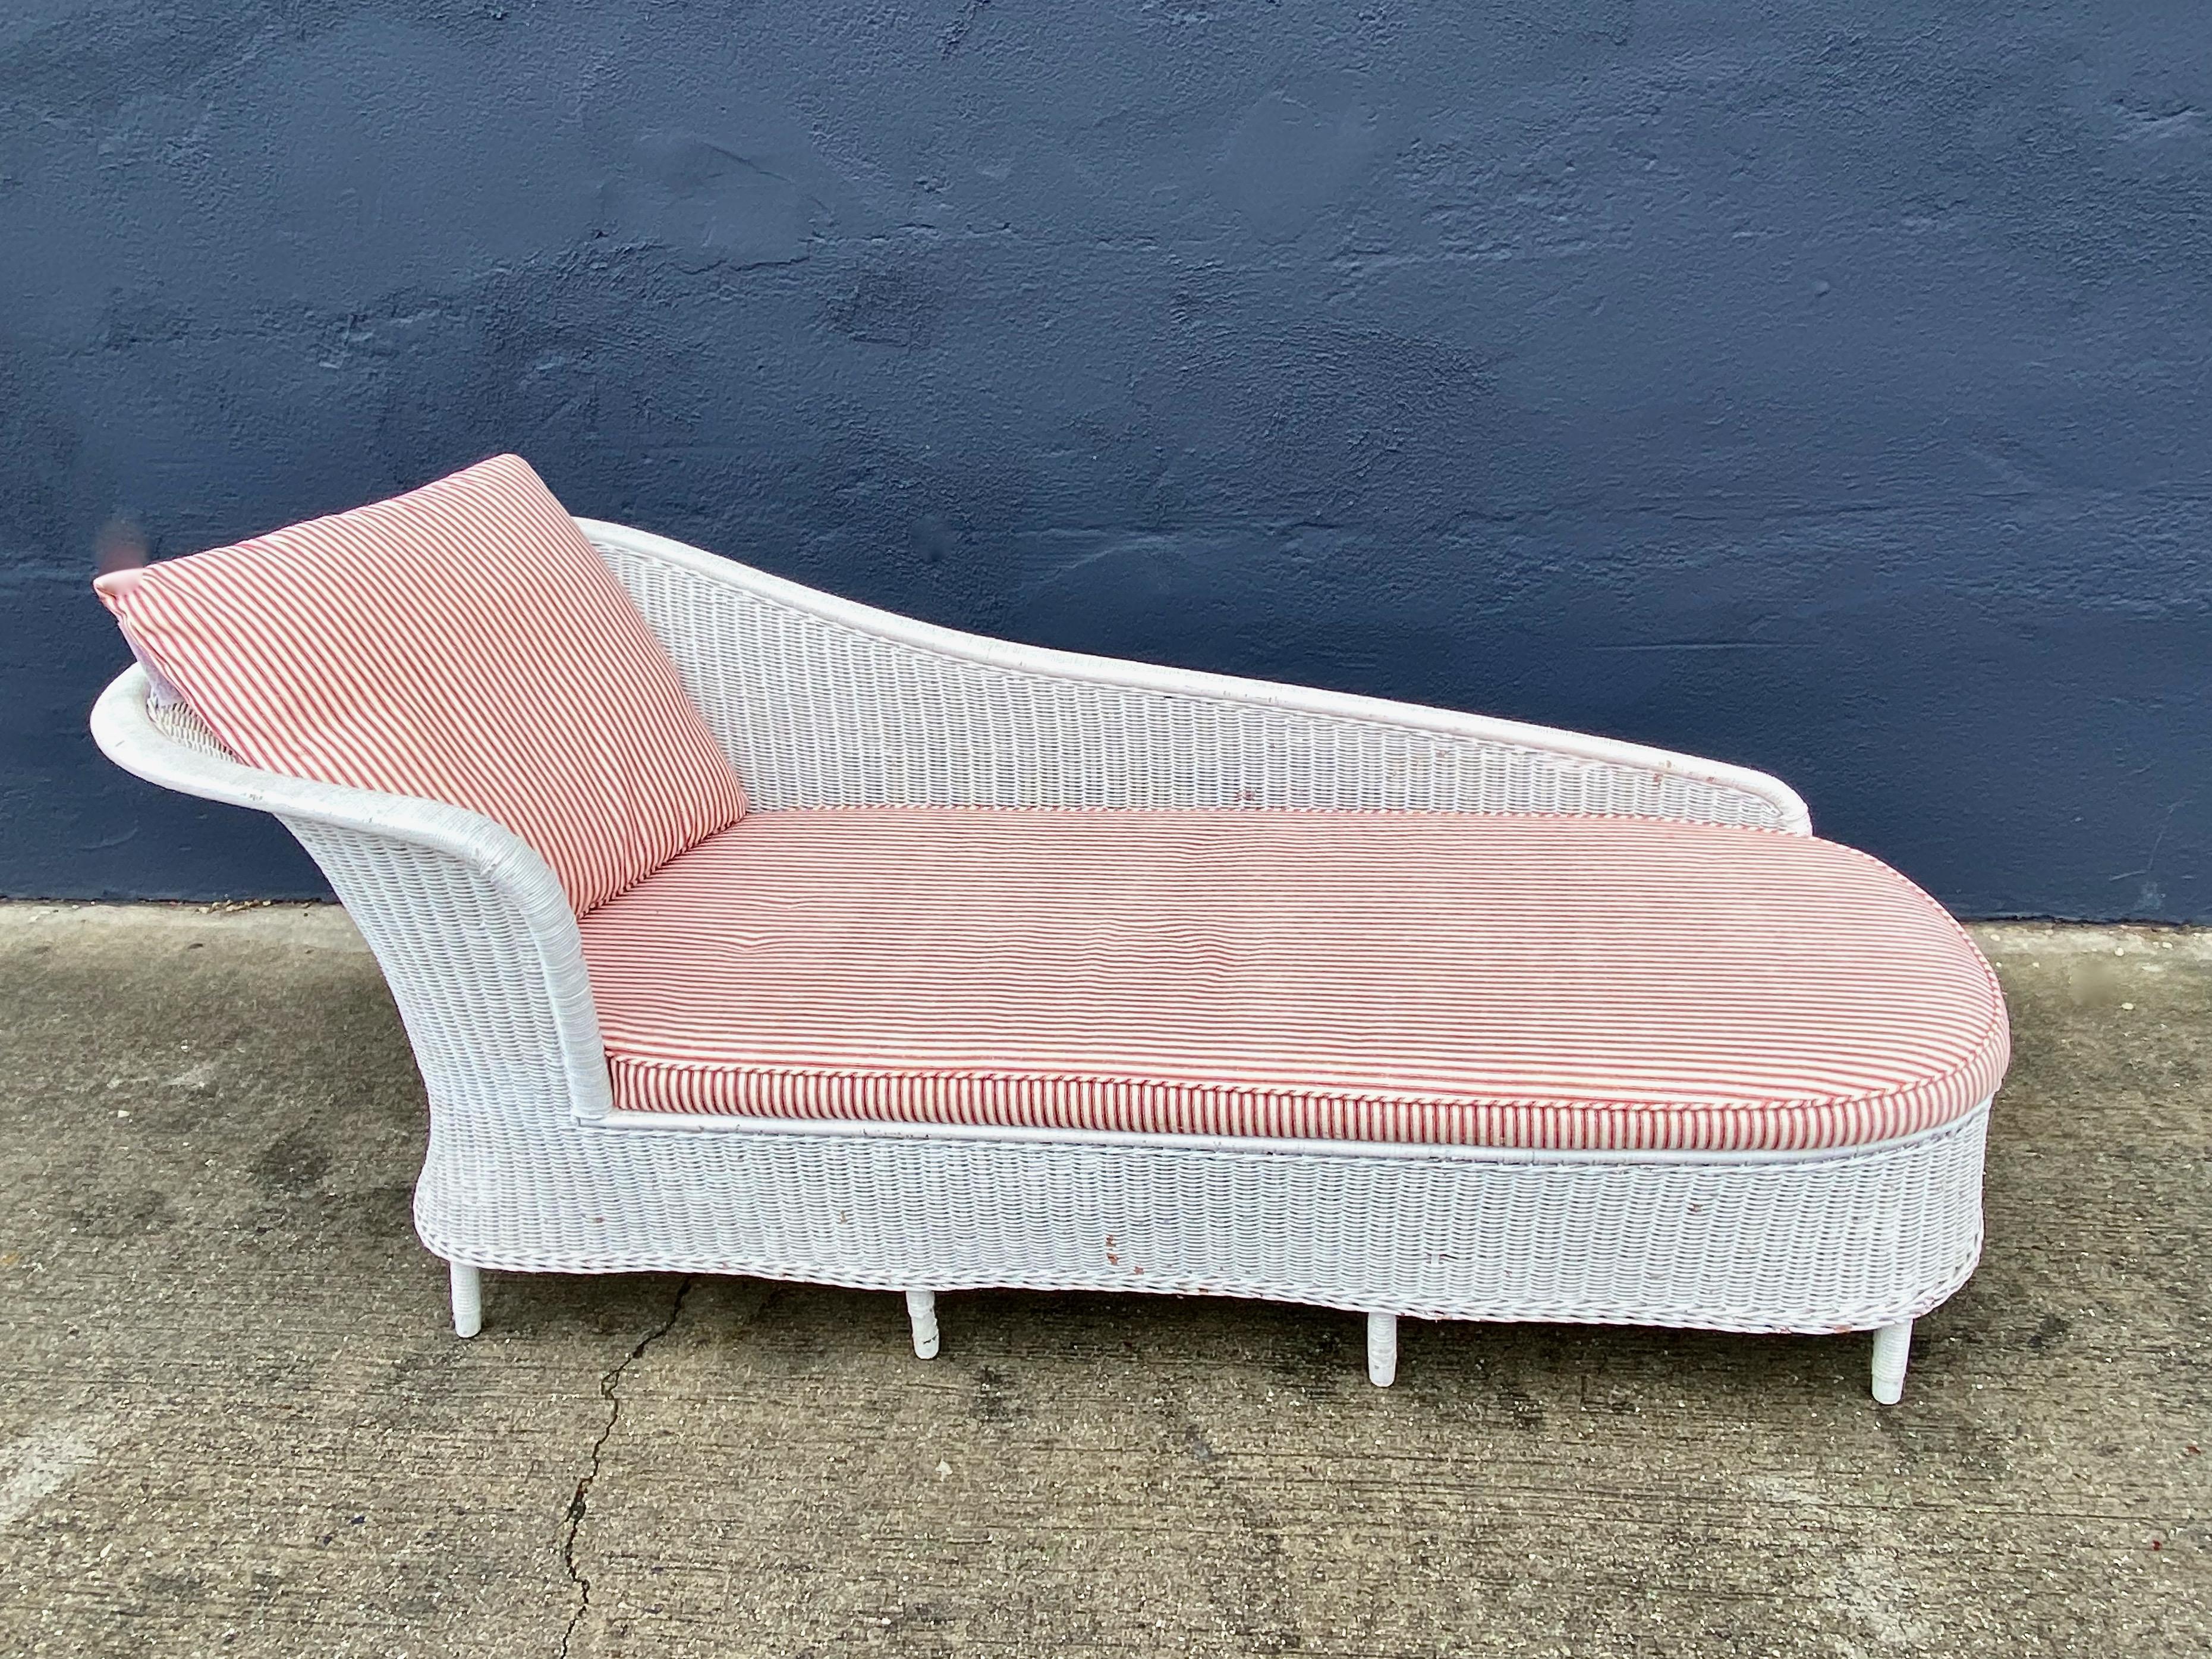 It is quite unusual to find an early 20th century wicker chaise longue in the nearly pristine as this one was found--fresh from a Beverly Hills Estate. This chaise embodies the current Coastal Design aesthetic. There is some minor rubbing to the